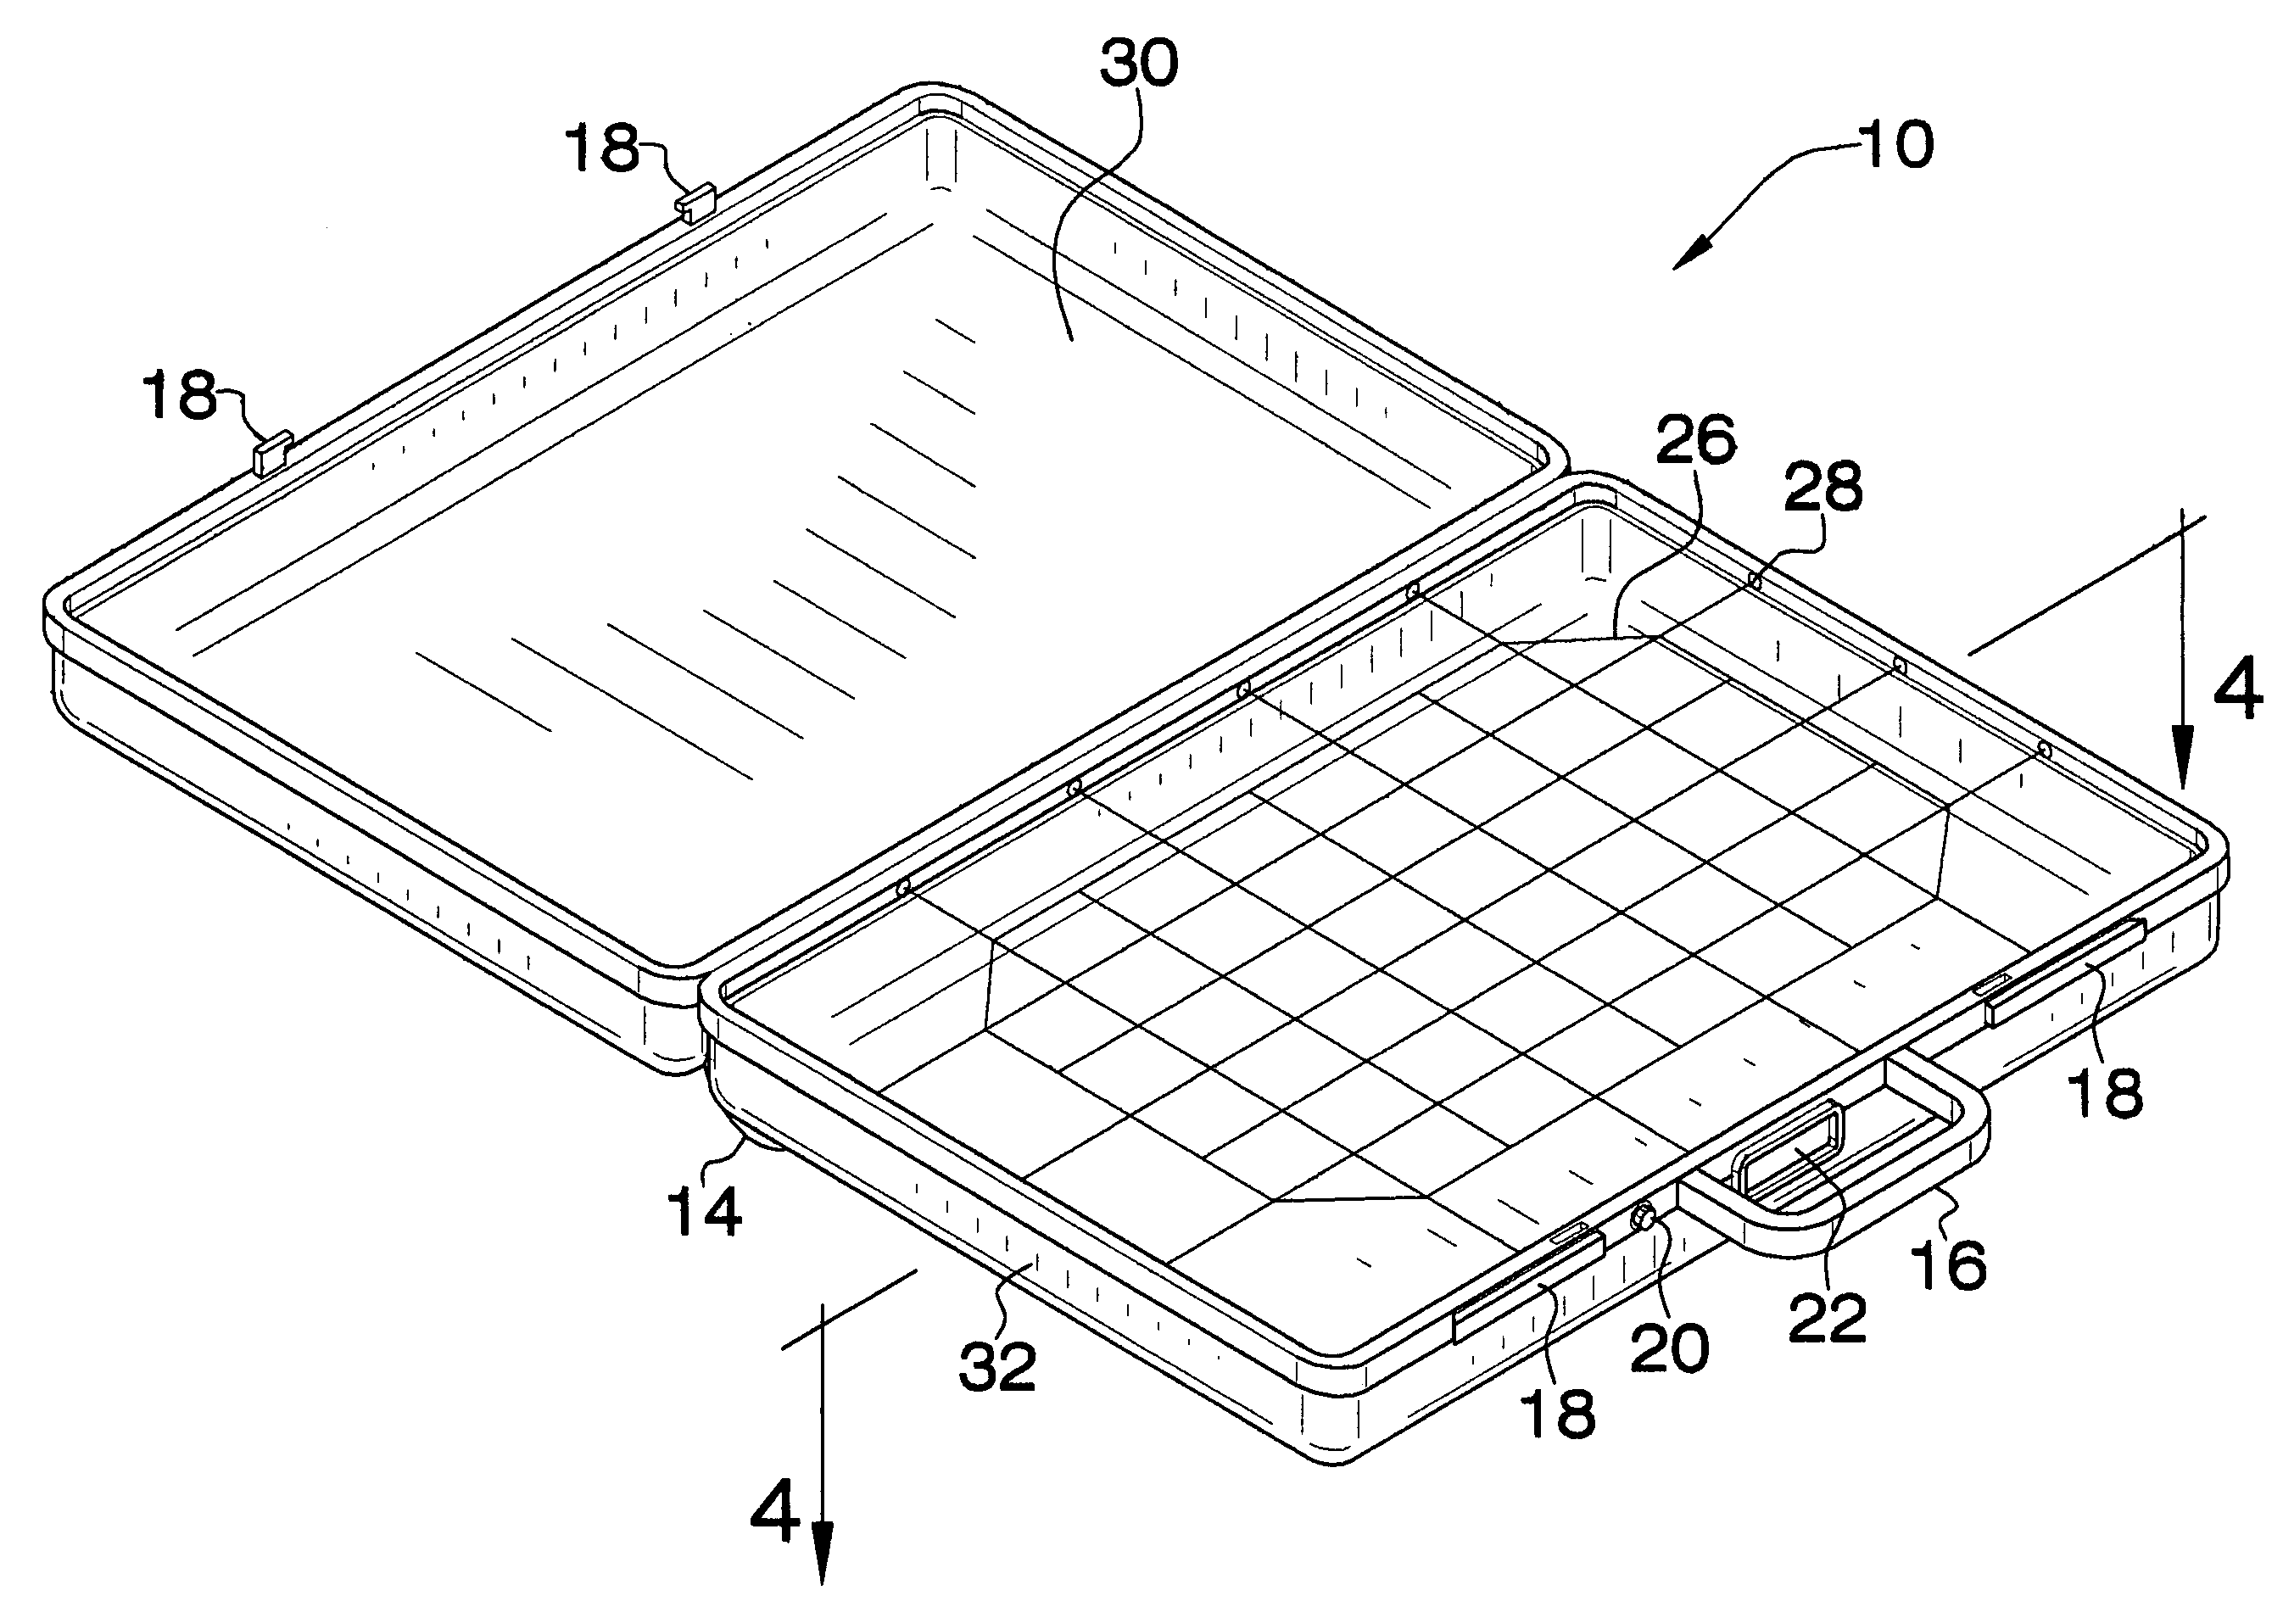 Suitcase with internal netting connected to tension sensors for weighing contents